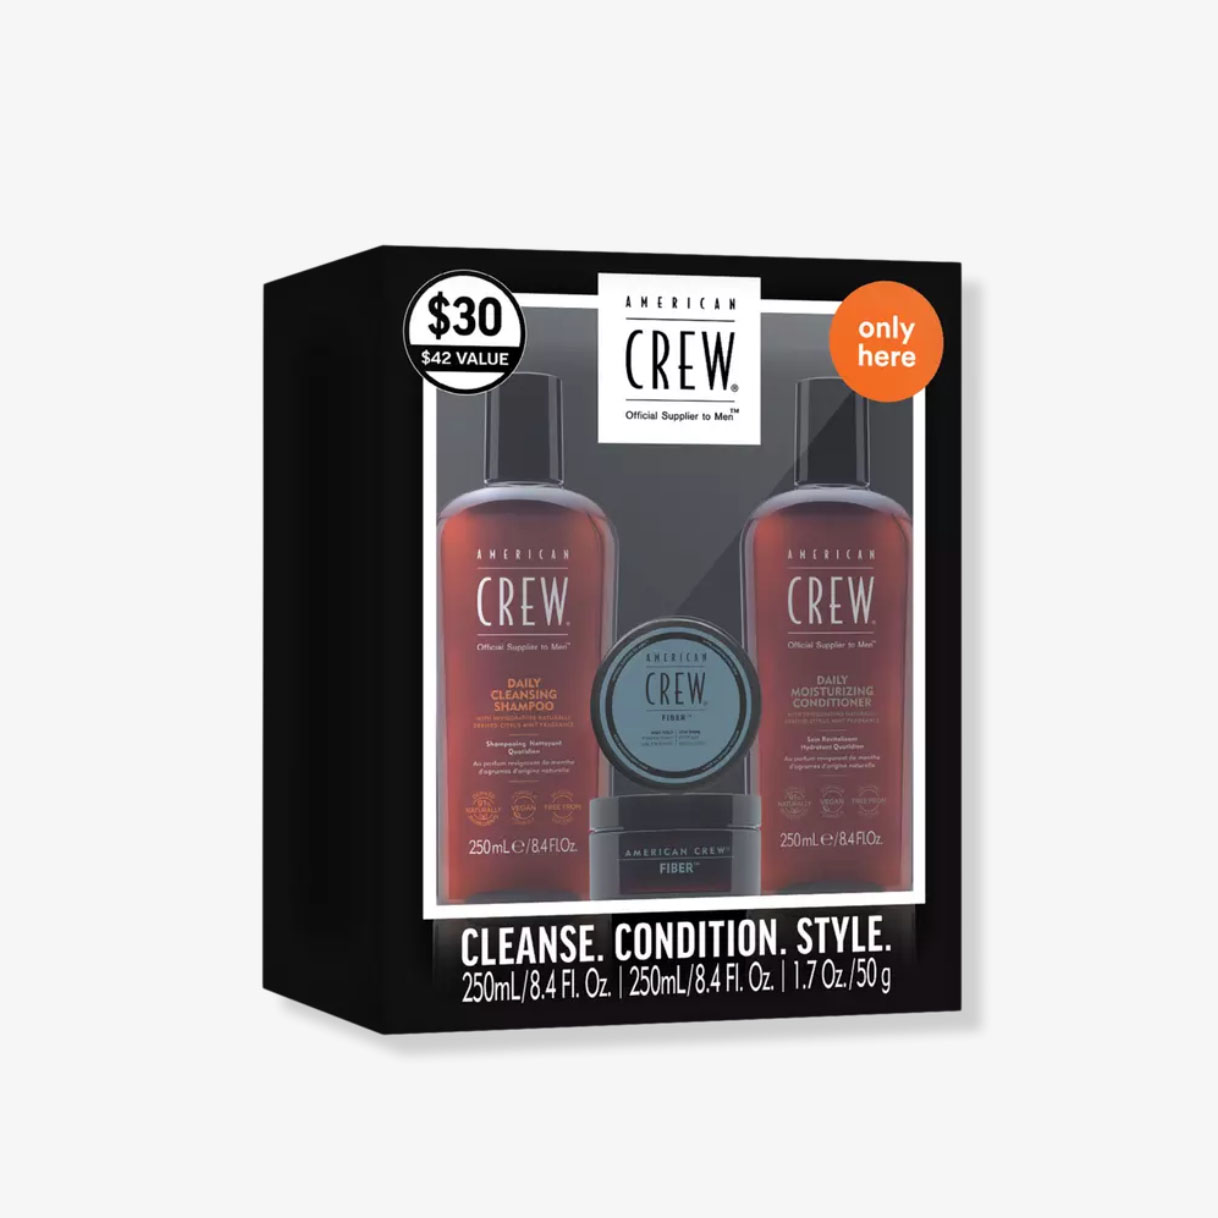 Cleanse Condition Style Exclusive Gift in box set